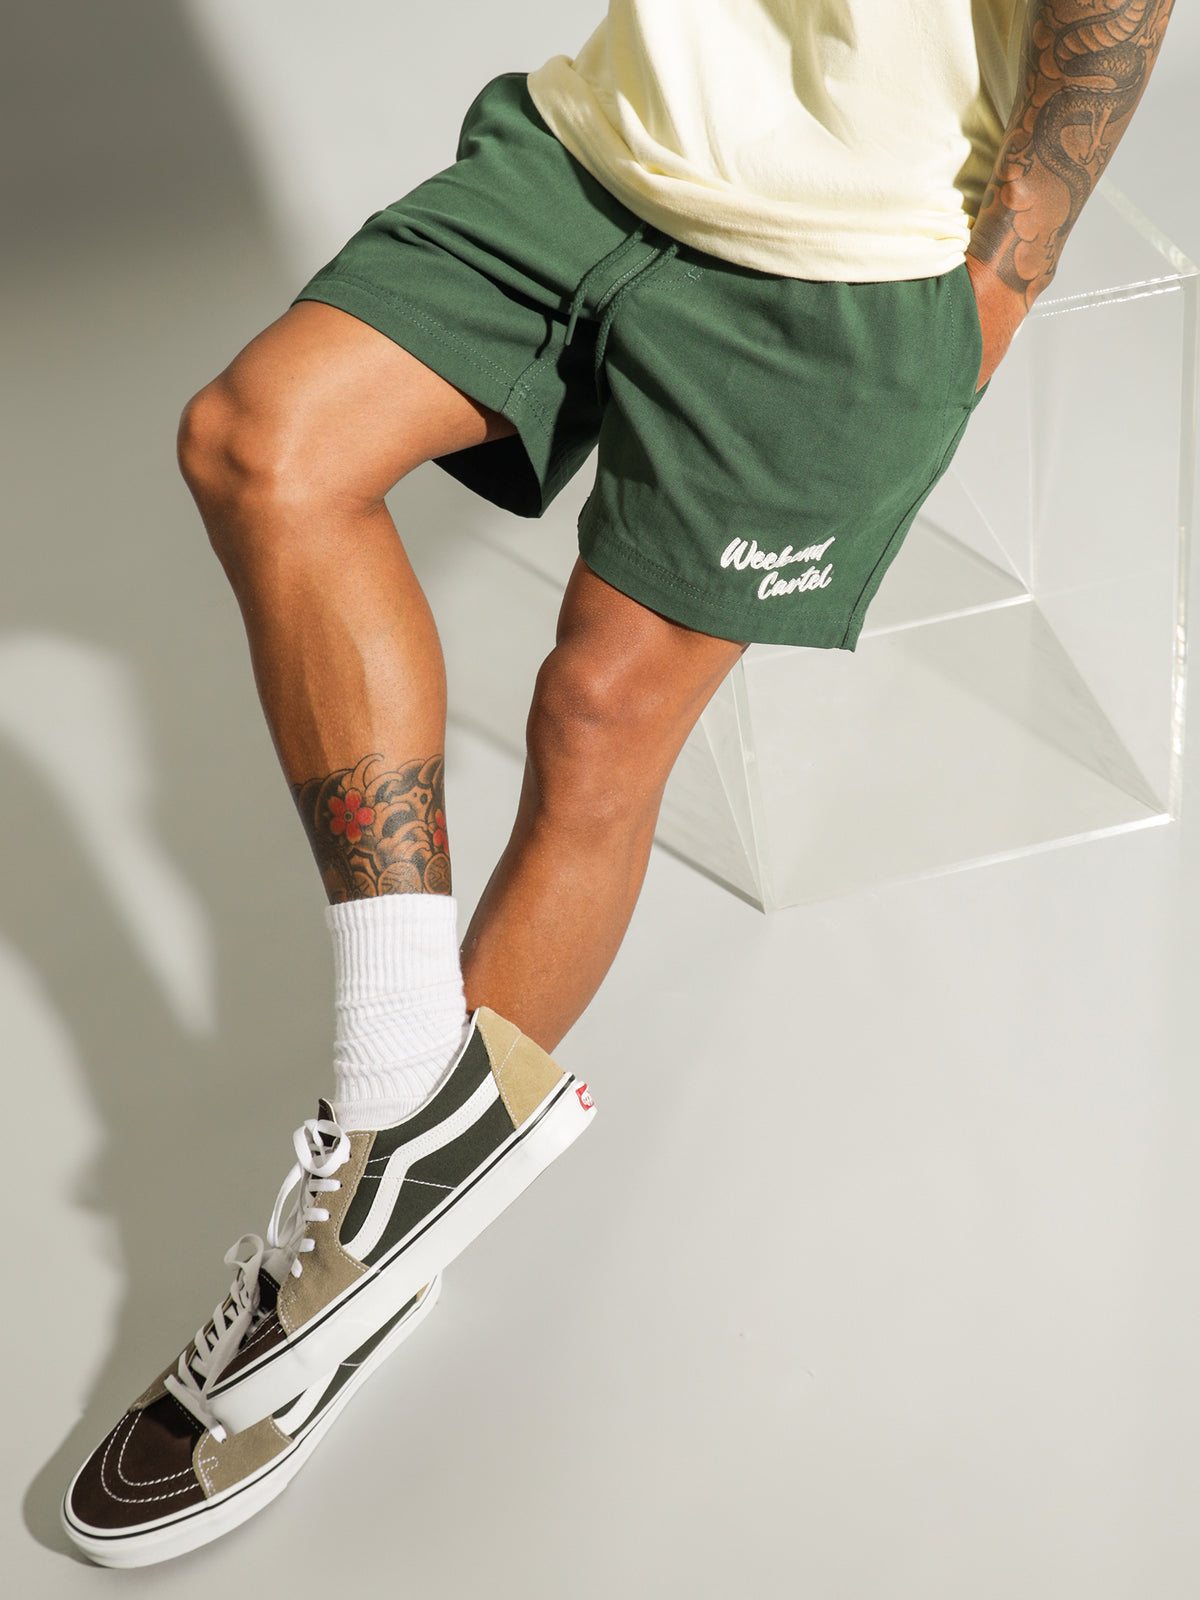 Leisure Shorts in Forest Green